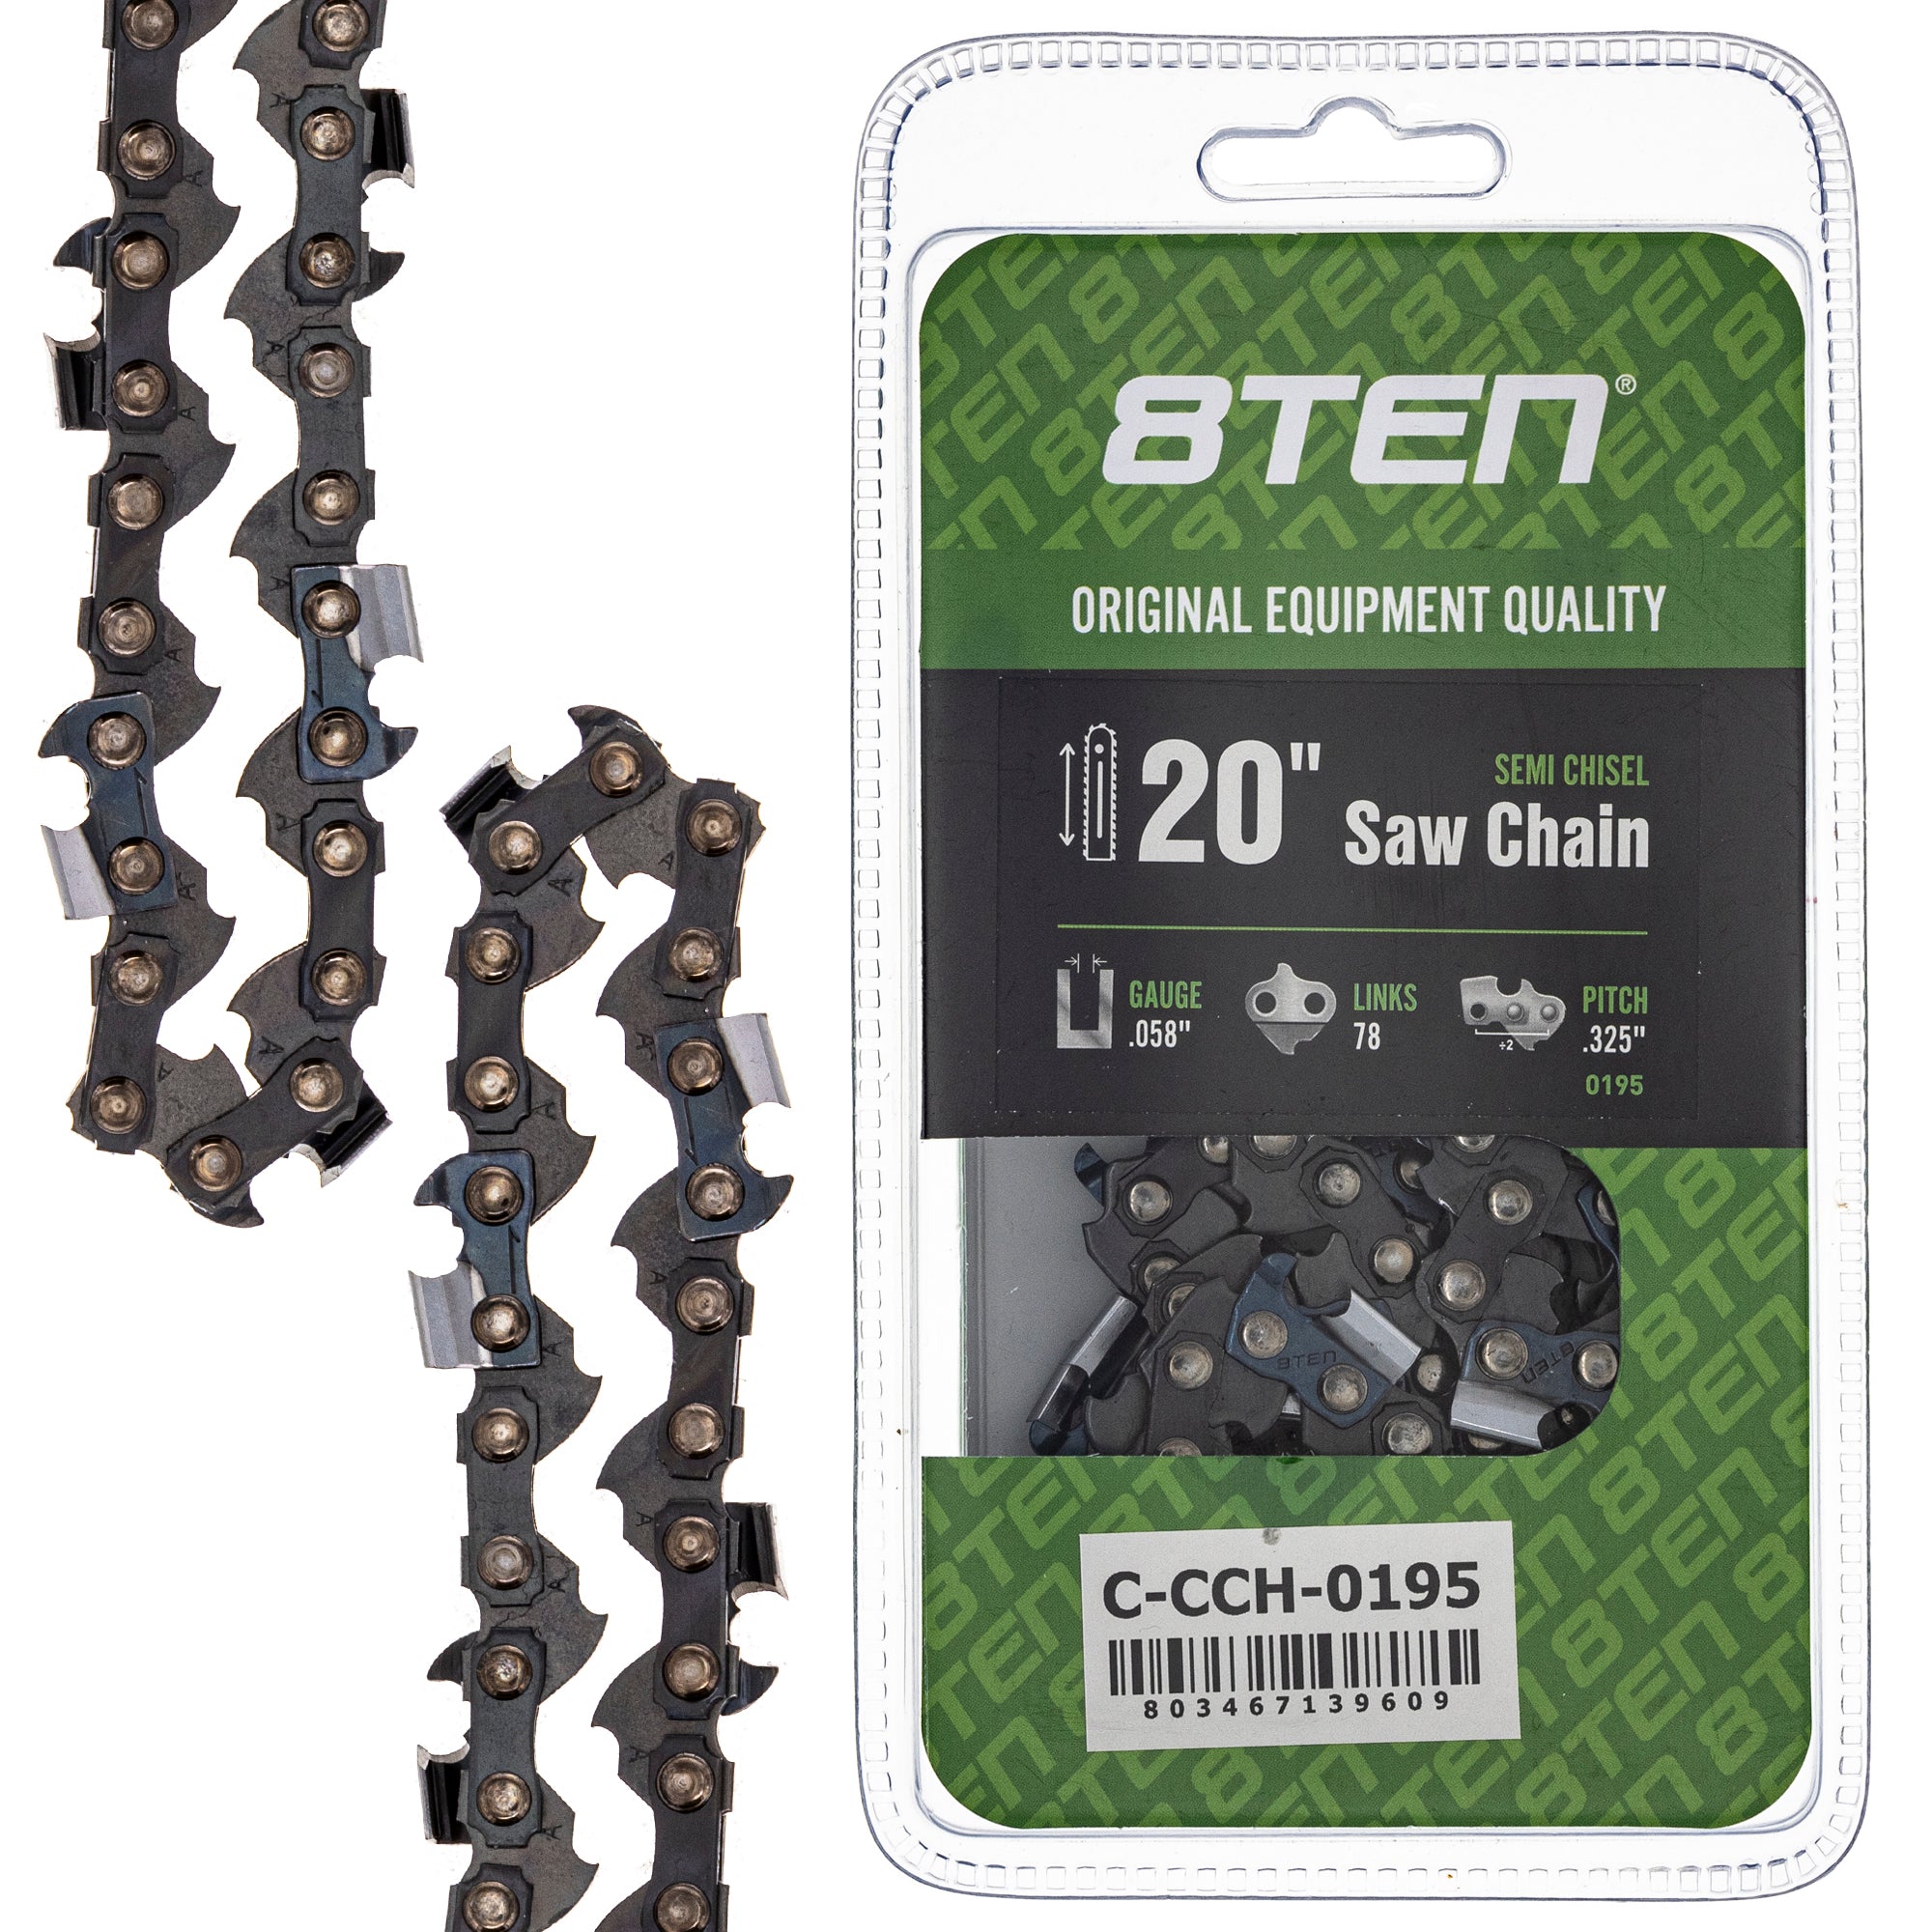 Chainsaw Chain 20 Inch .058 .325 78DL for zOTHER Oregon PS EA6101P53G EA6100PREG 8TEN 810-CCC2317H